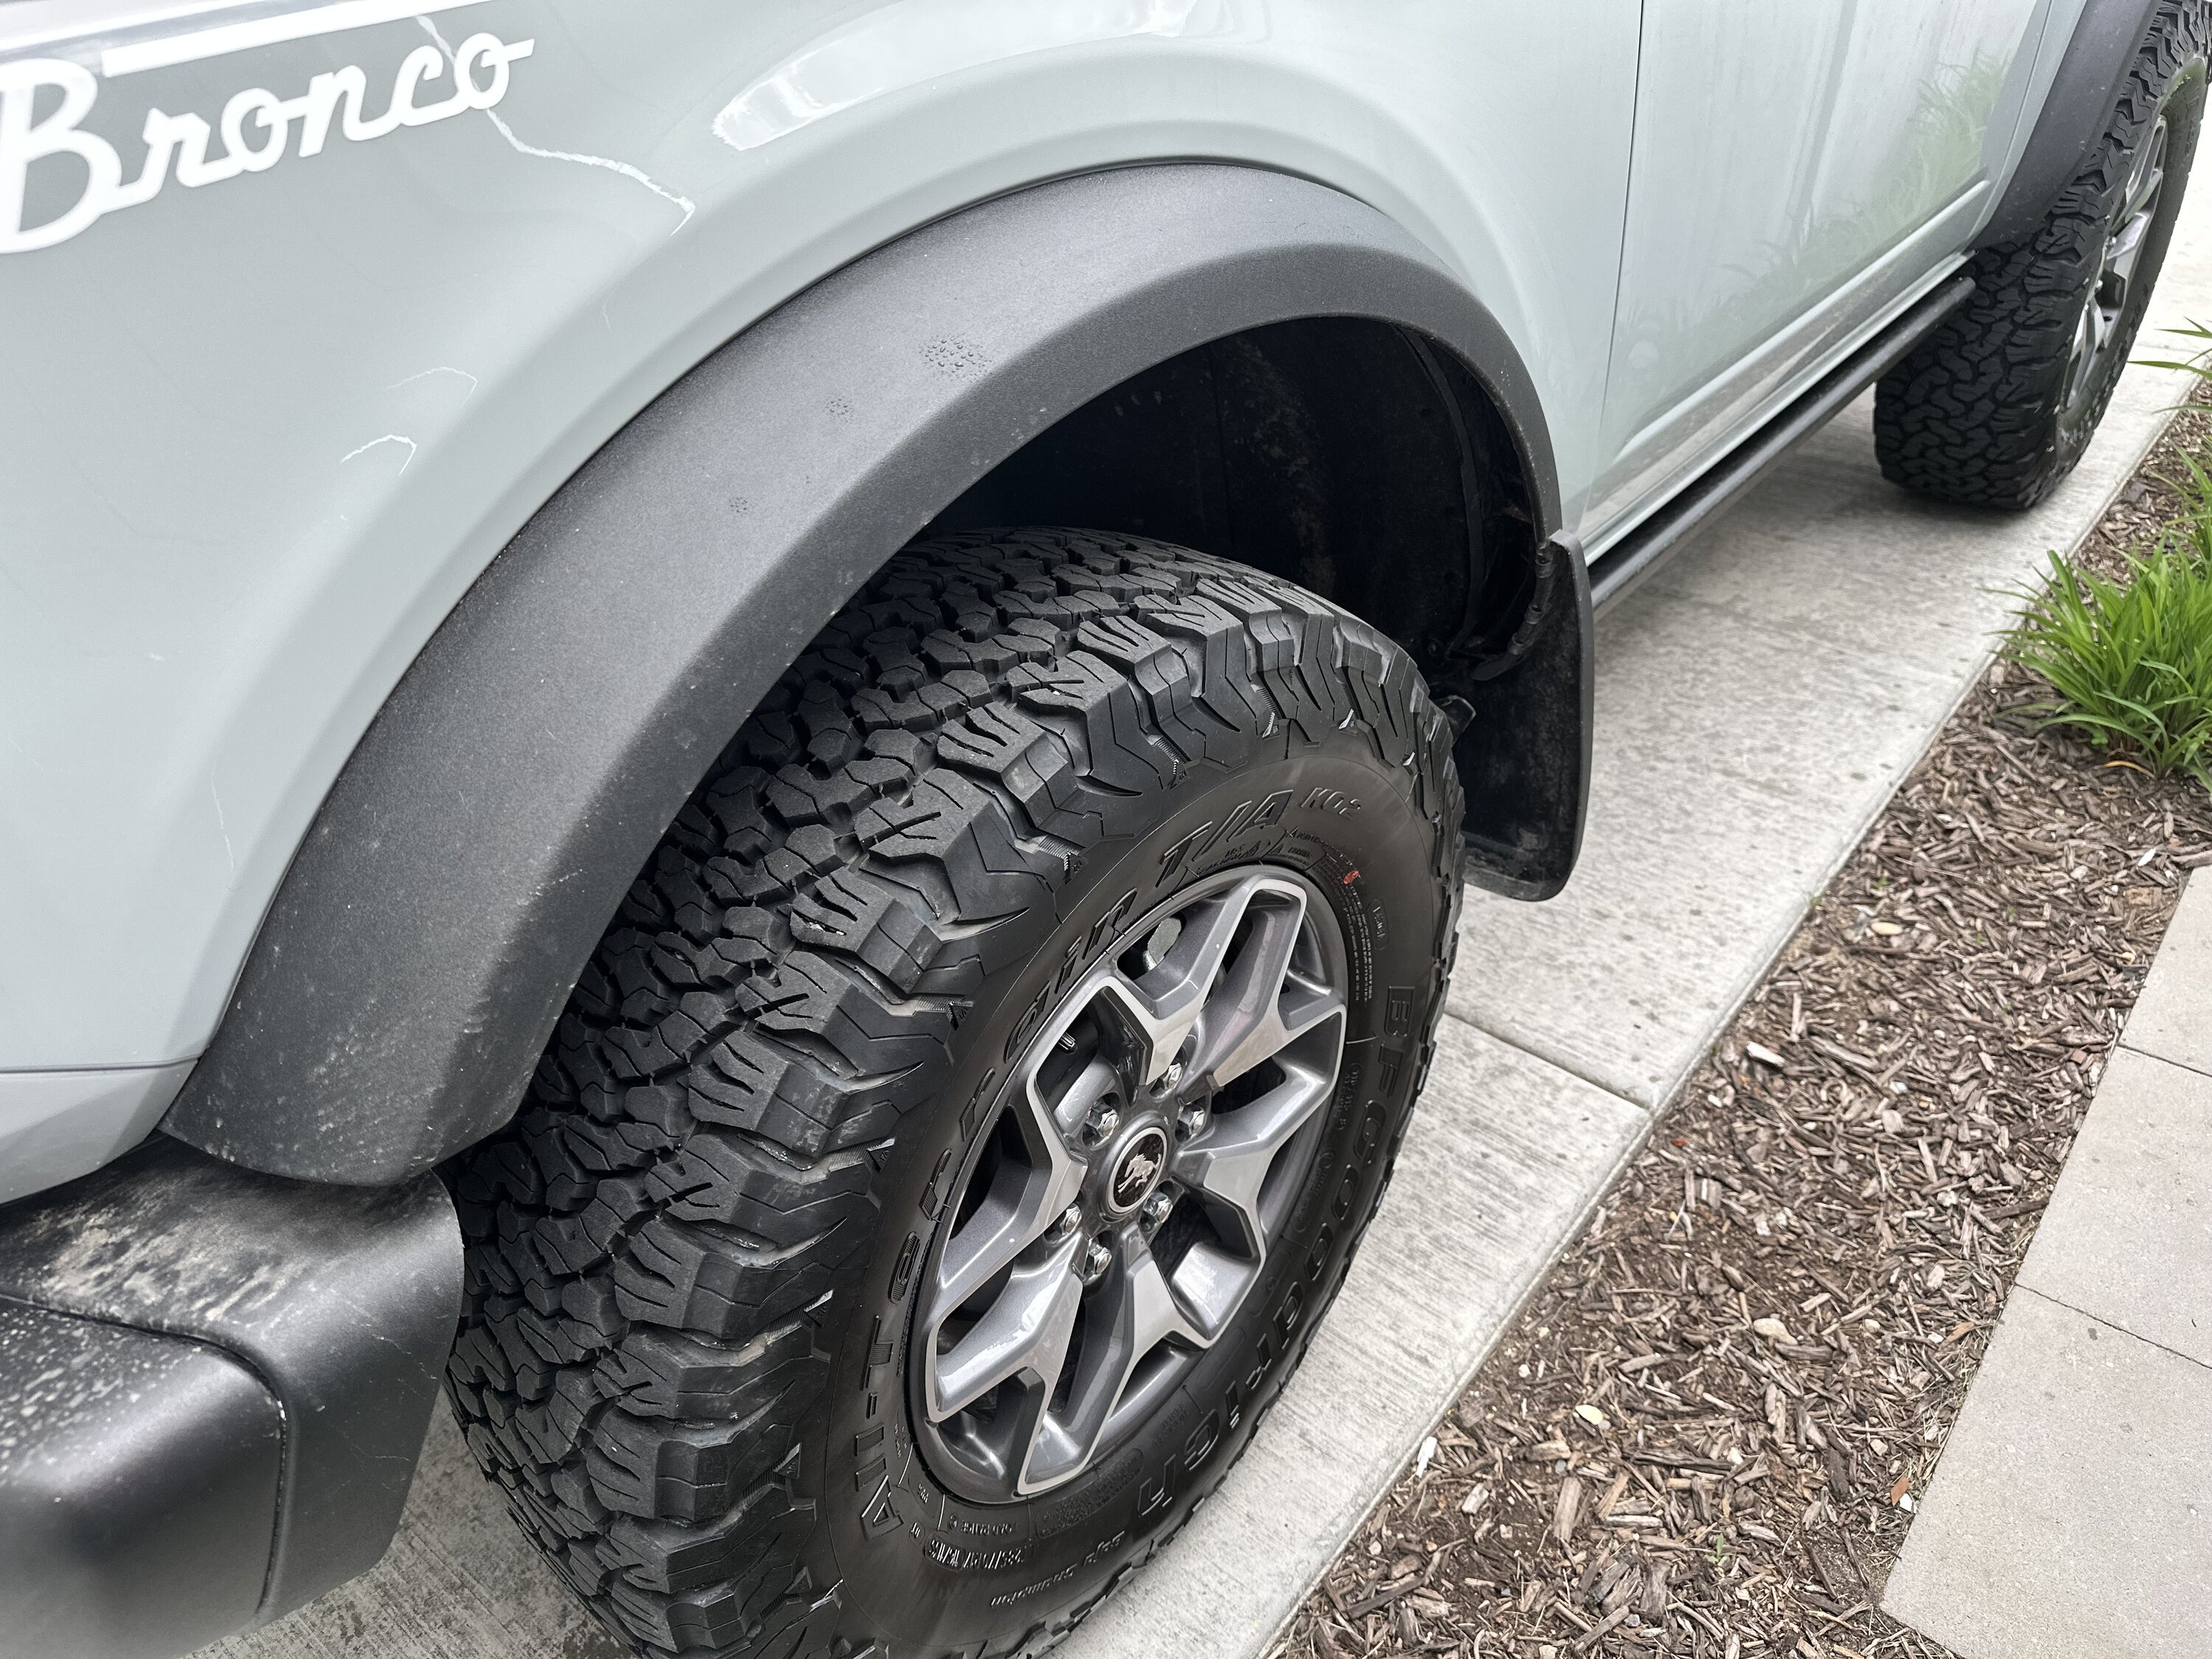 Ford Bronco I need mud flaps, whats everyone using? tempImageLa7d3Z